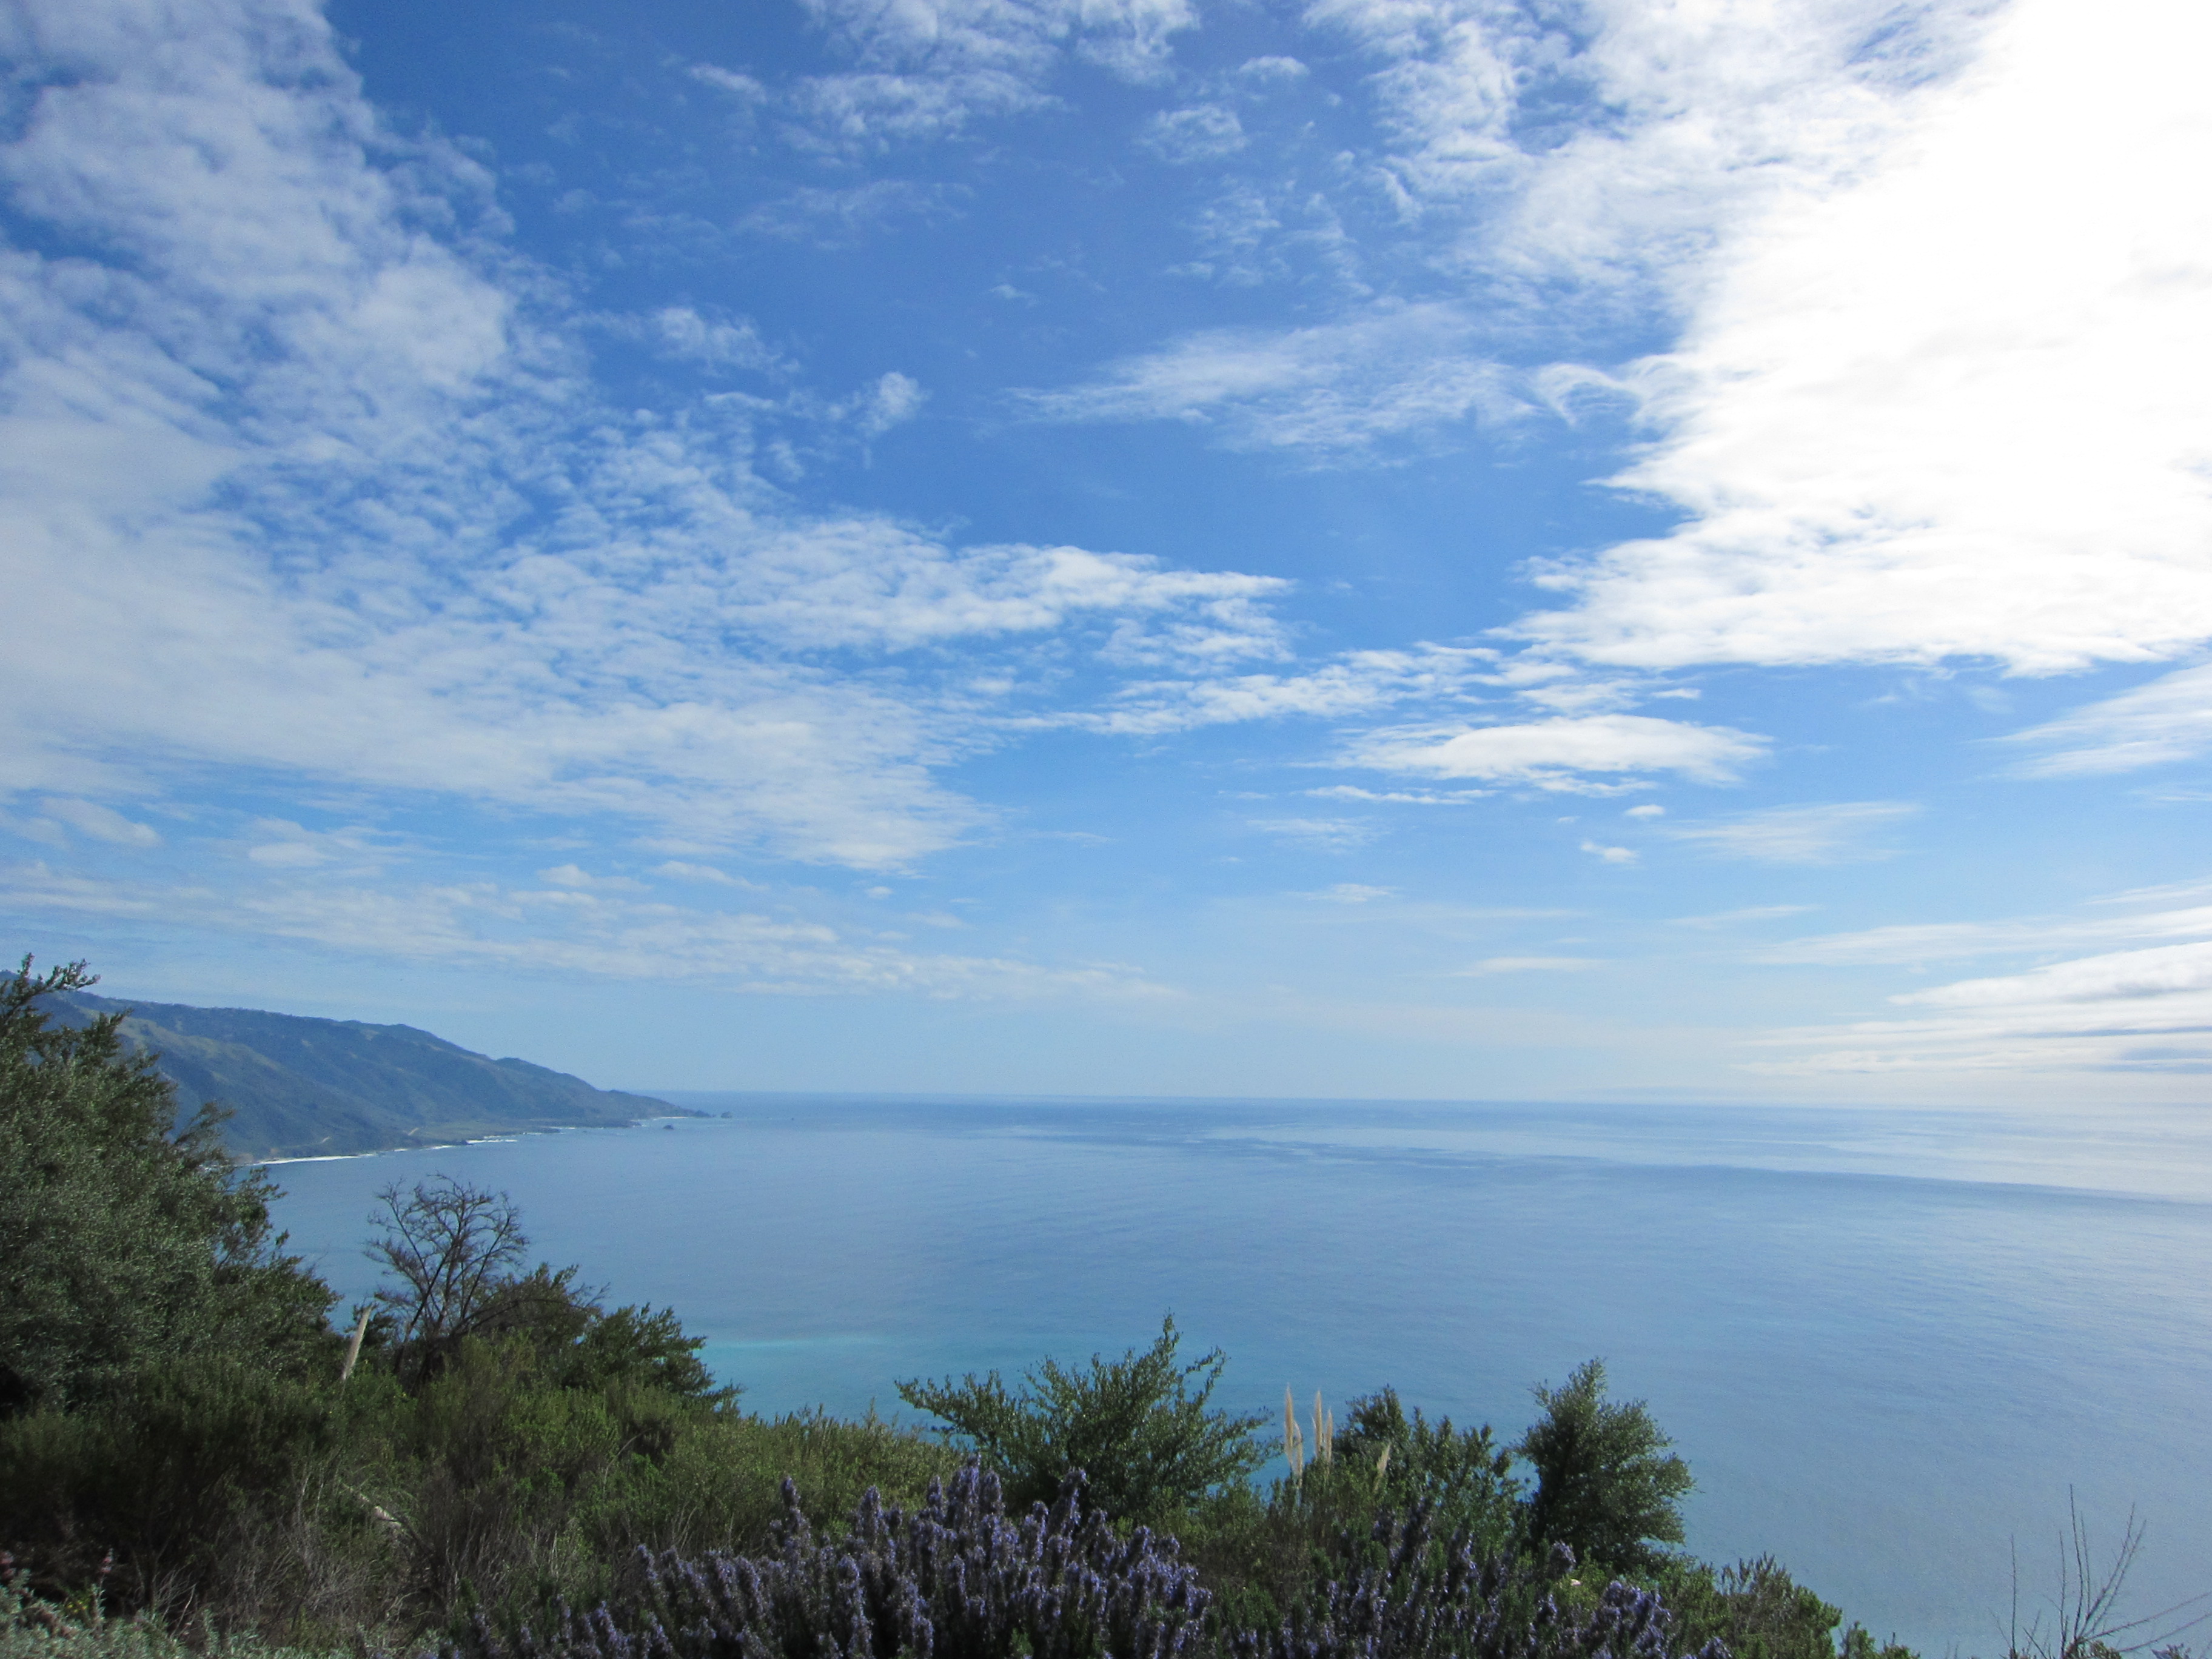 Big Sur vista from my silent retreat in March 2011